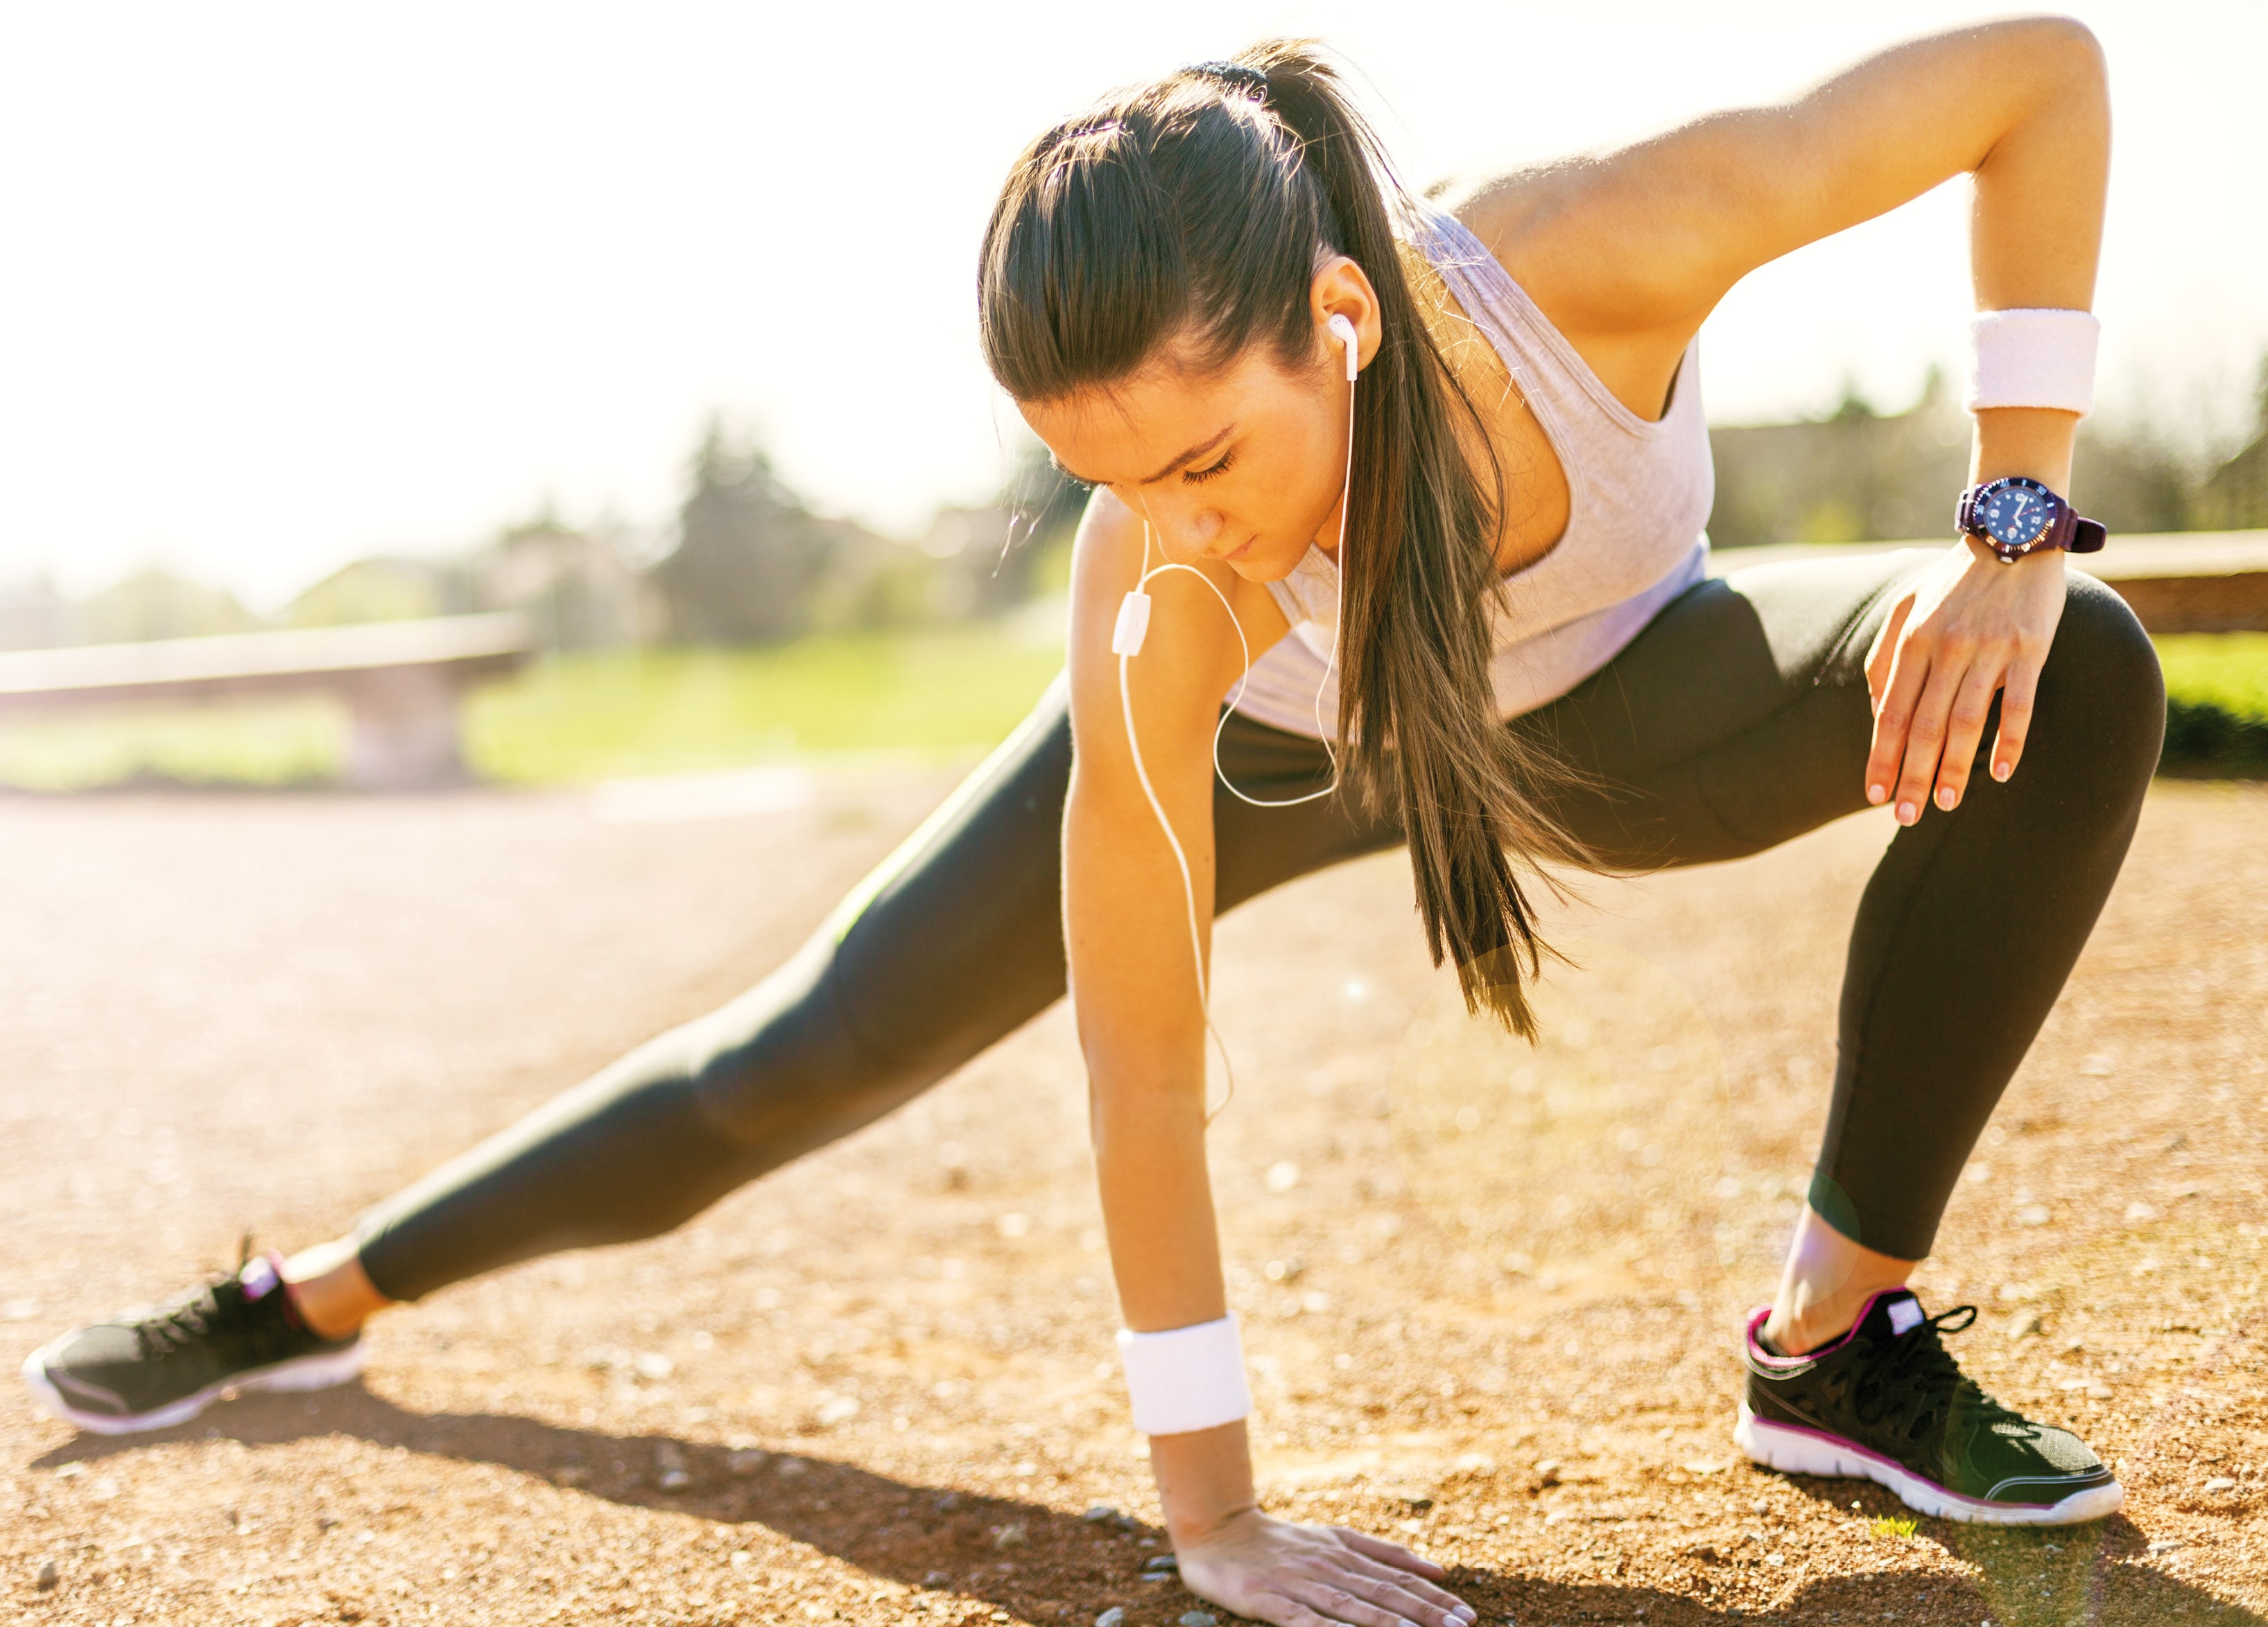 Exercise To Improve Your Quality Of Life Or Quality Of Life (Shutterstock)